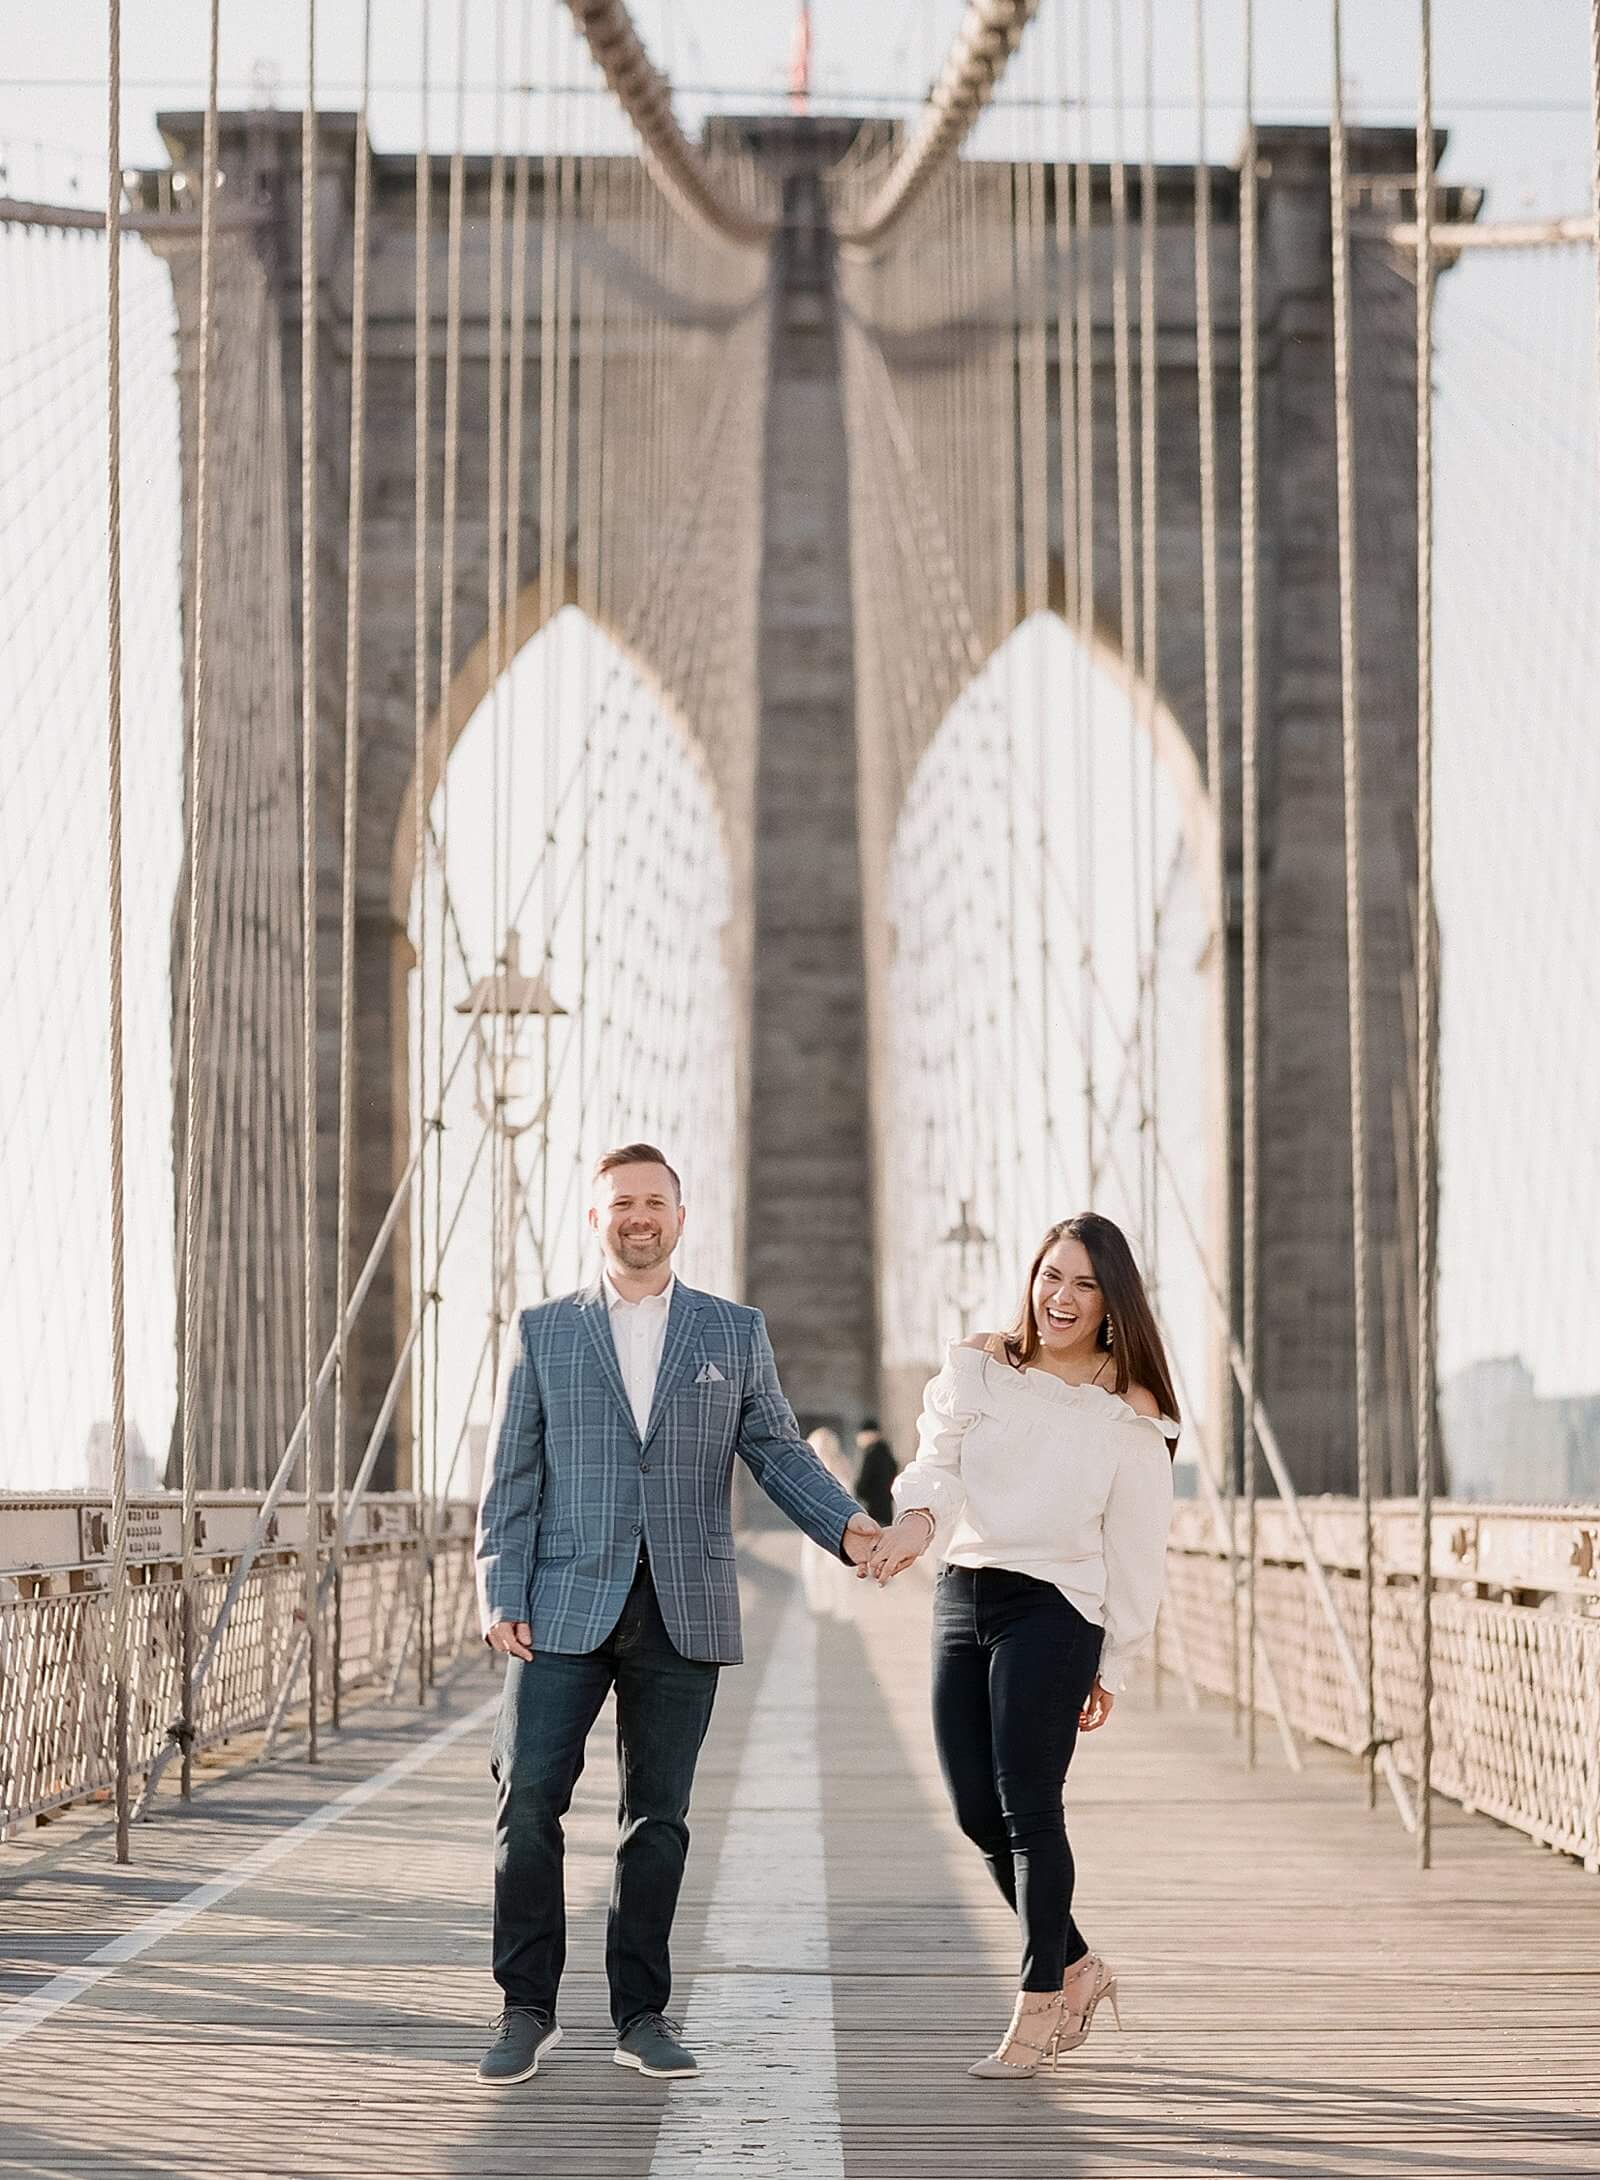 Couple durring an engagement session on the Brooklyn Bridge